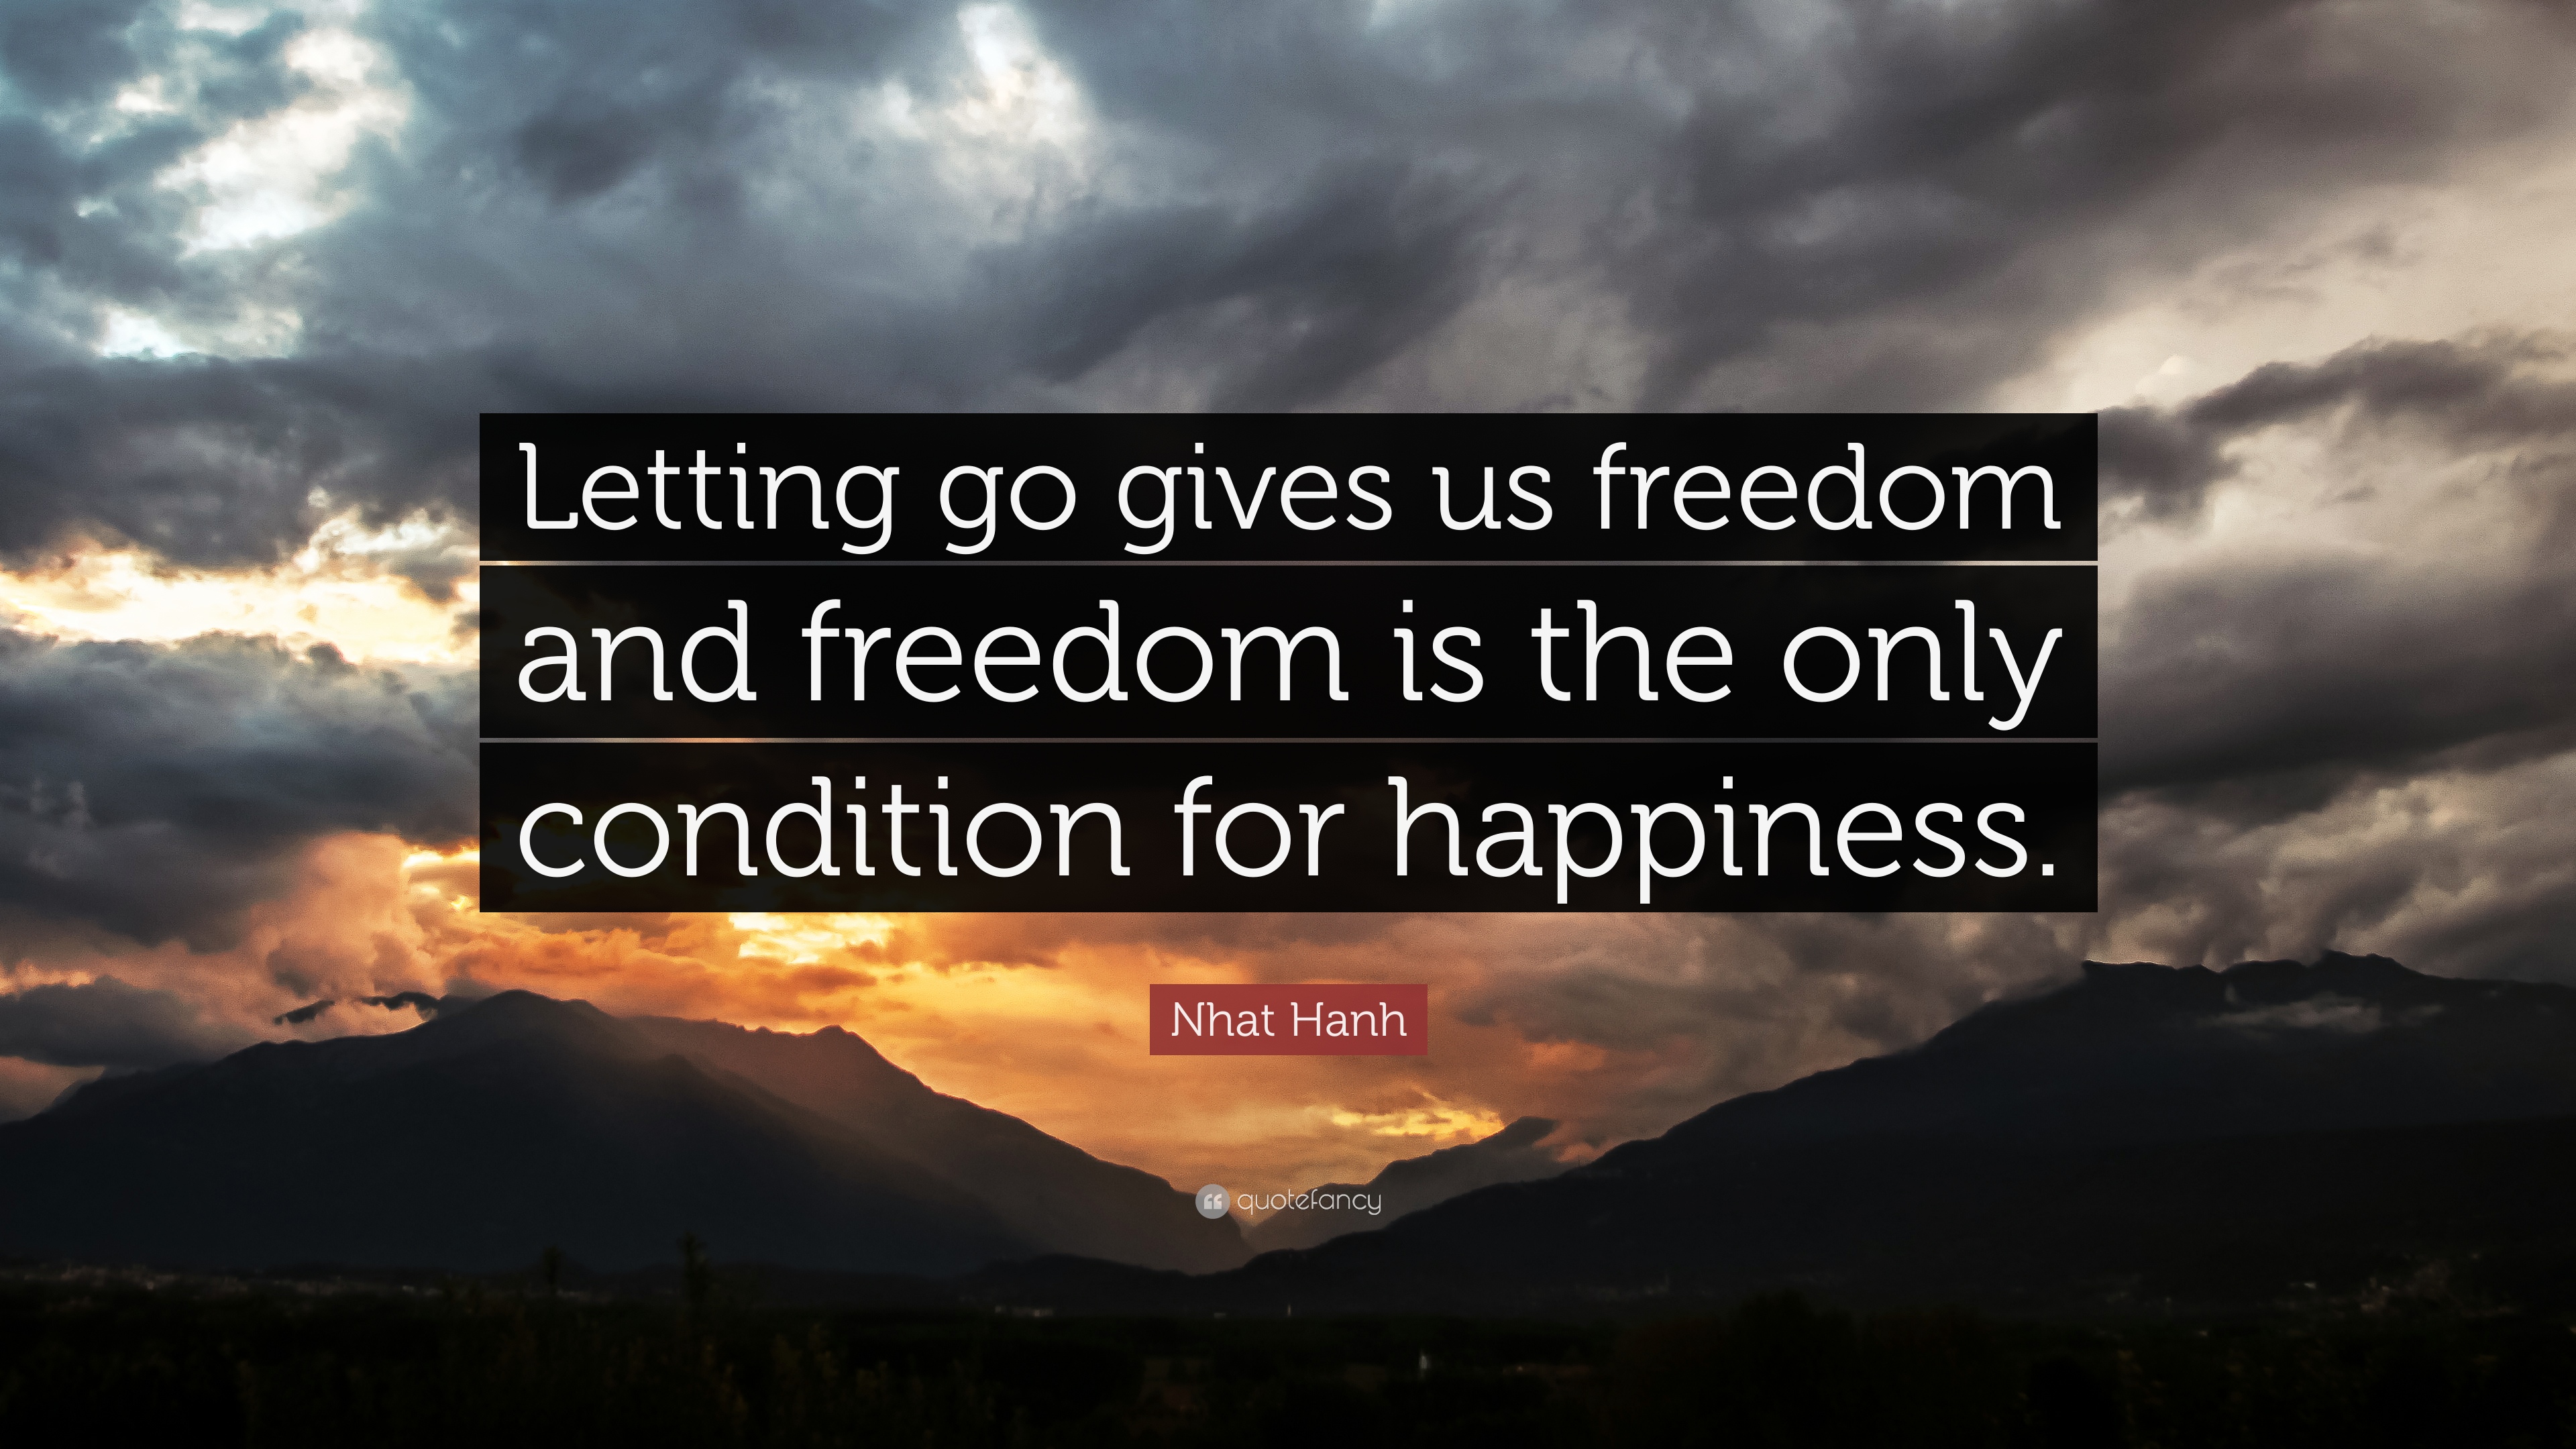 Nhat Hanh Quote: “Letting go gives us freedom and freedom is